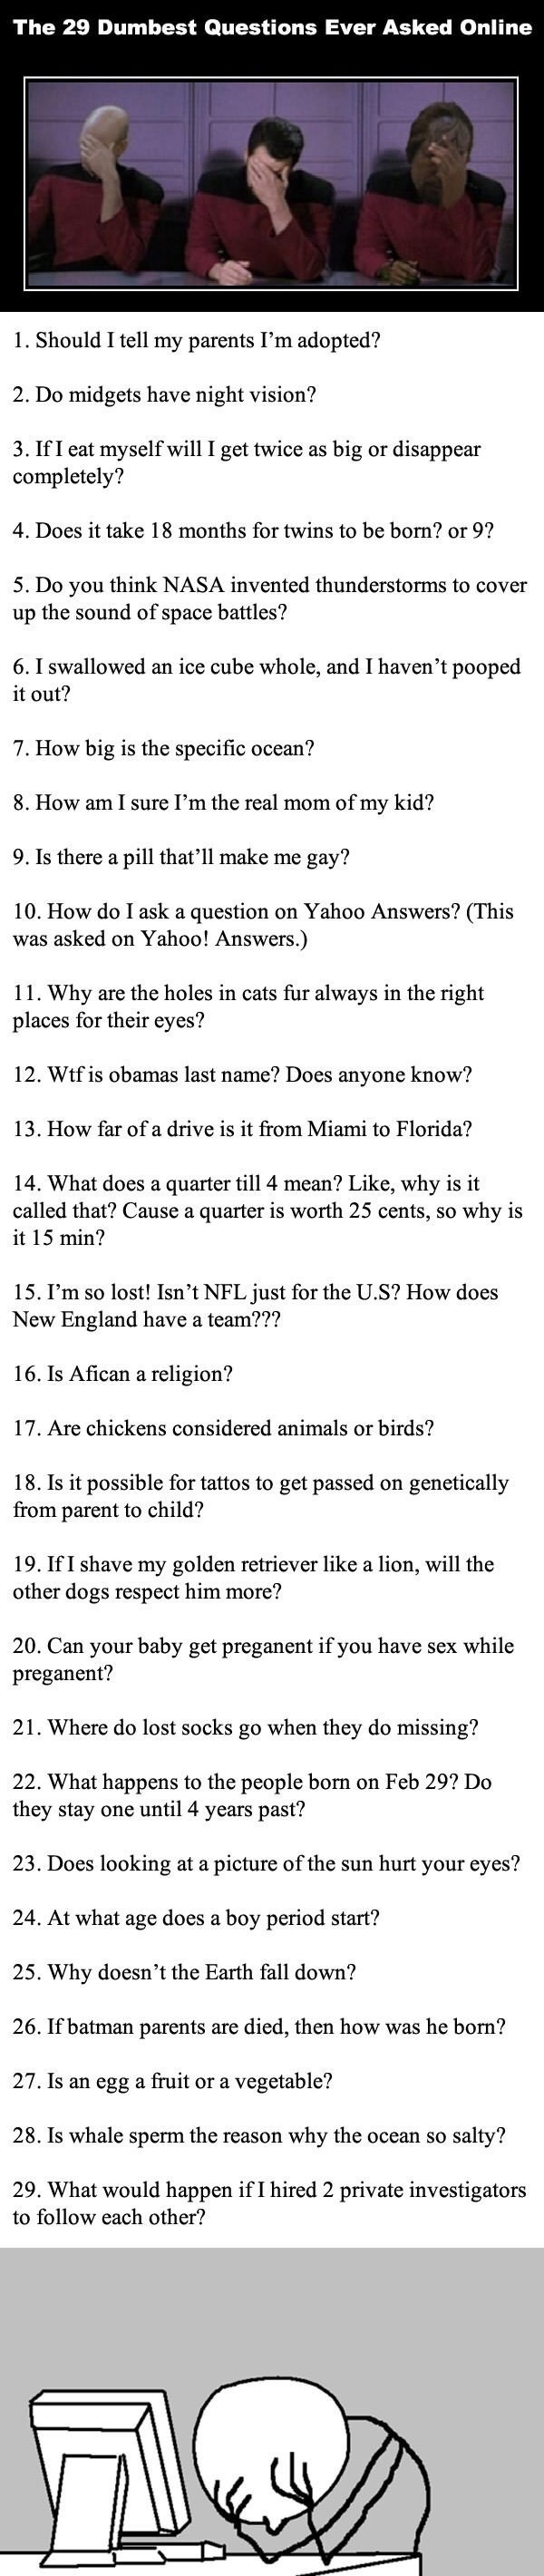 Dumbest questions asked online